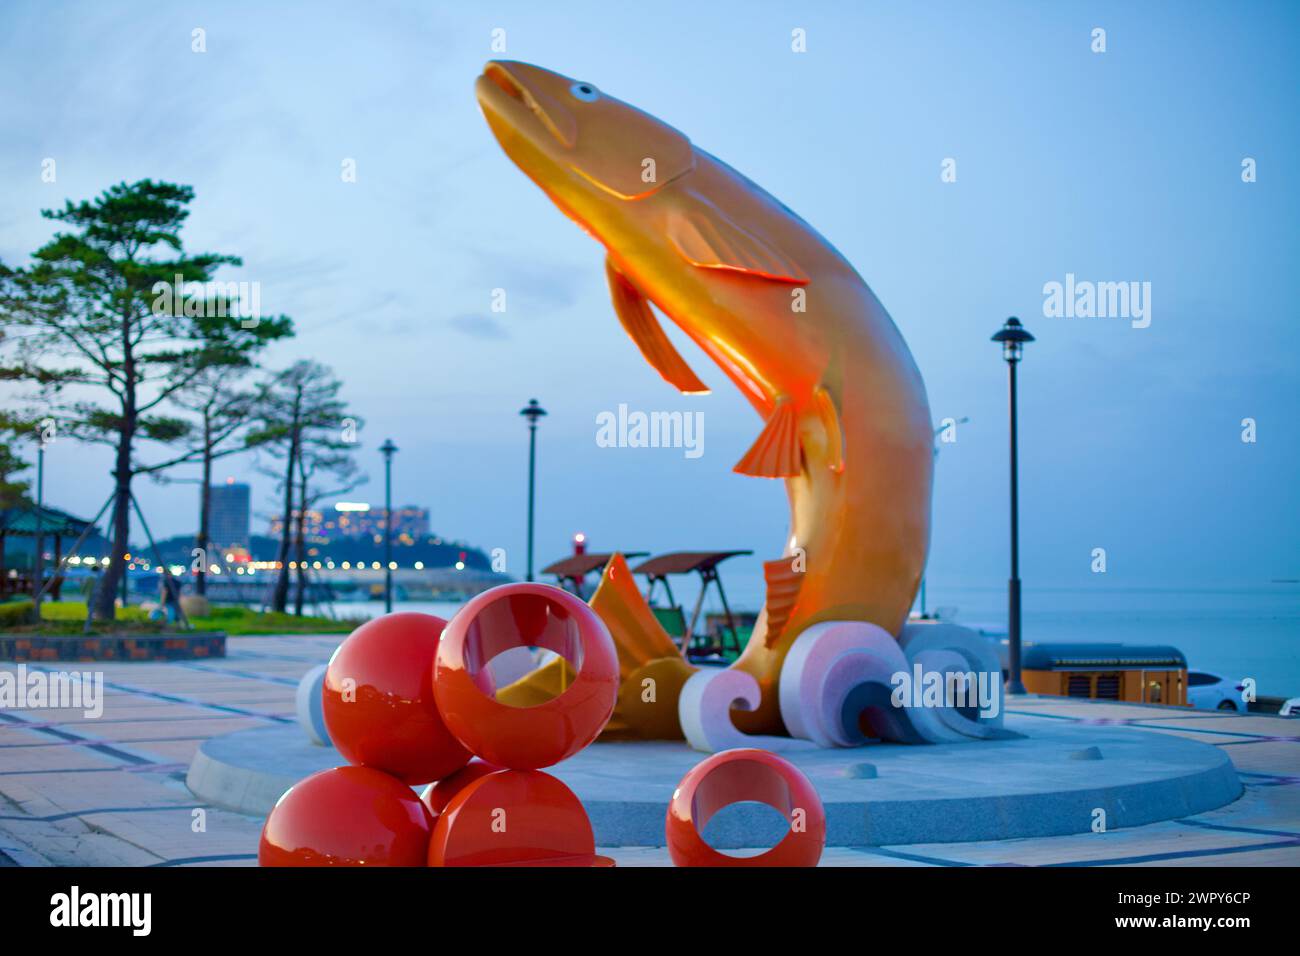 Yangyang County, South Korea - July 30, 2019: A striking 10-meter tall sculpture of a salmon leaping out of the water at Golden Salmon Park, painted r Stock Photo